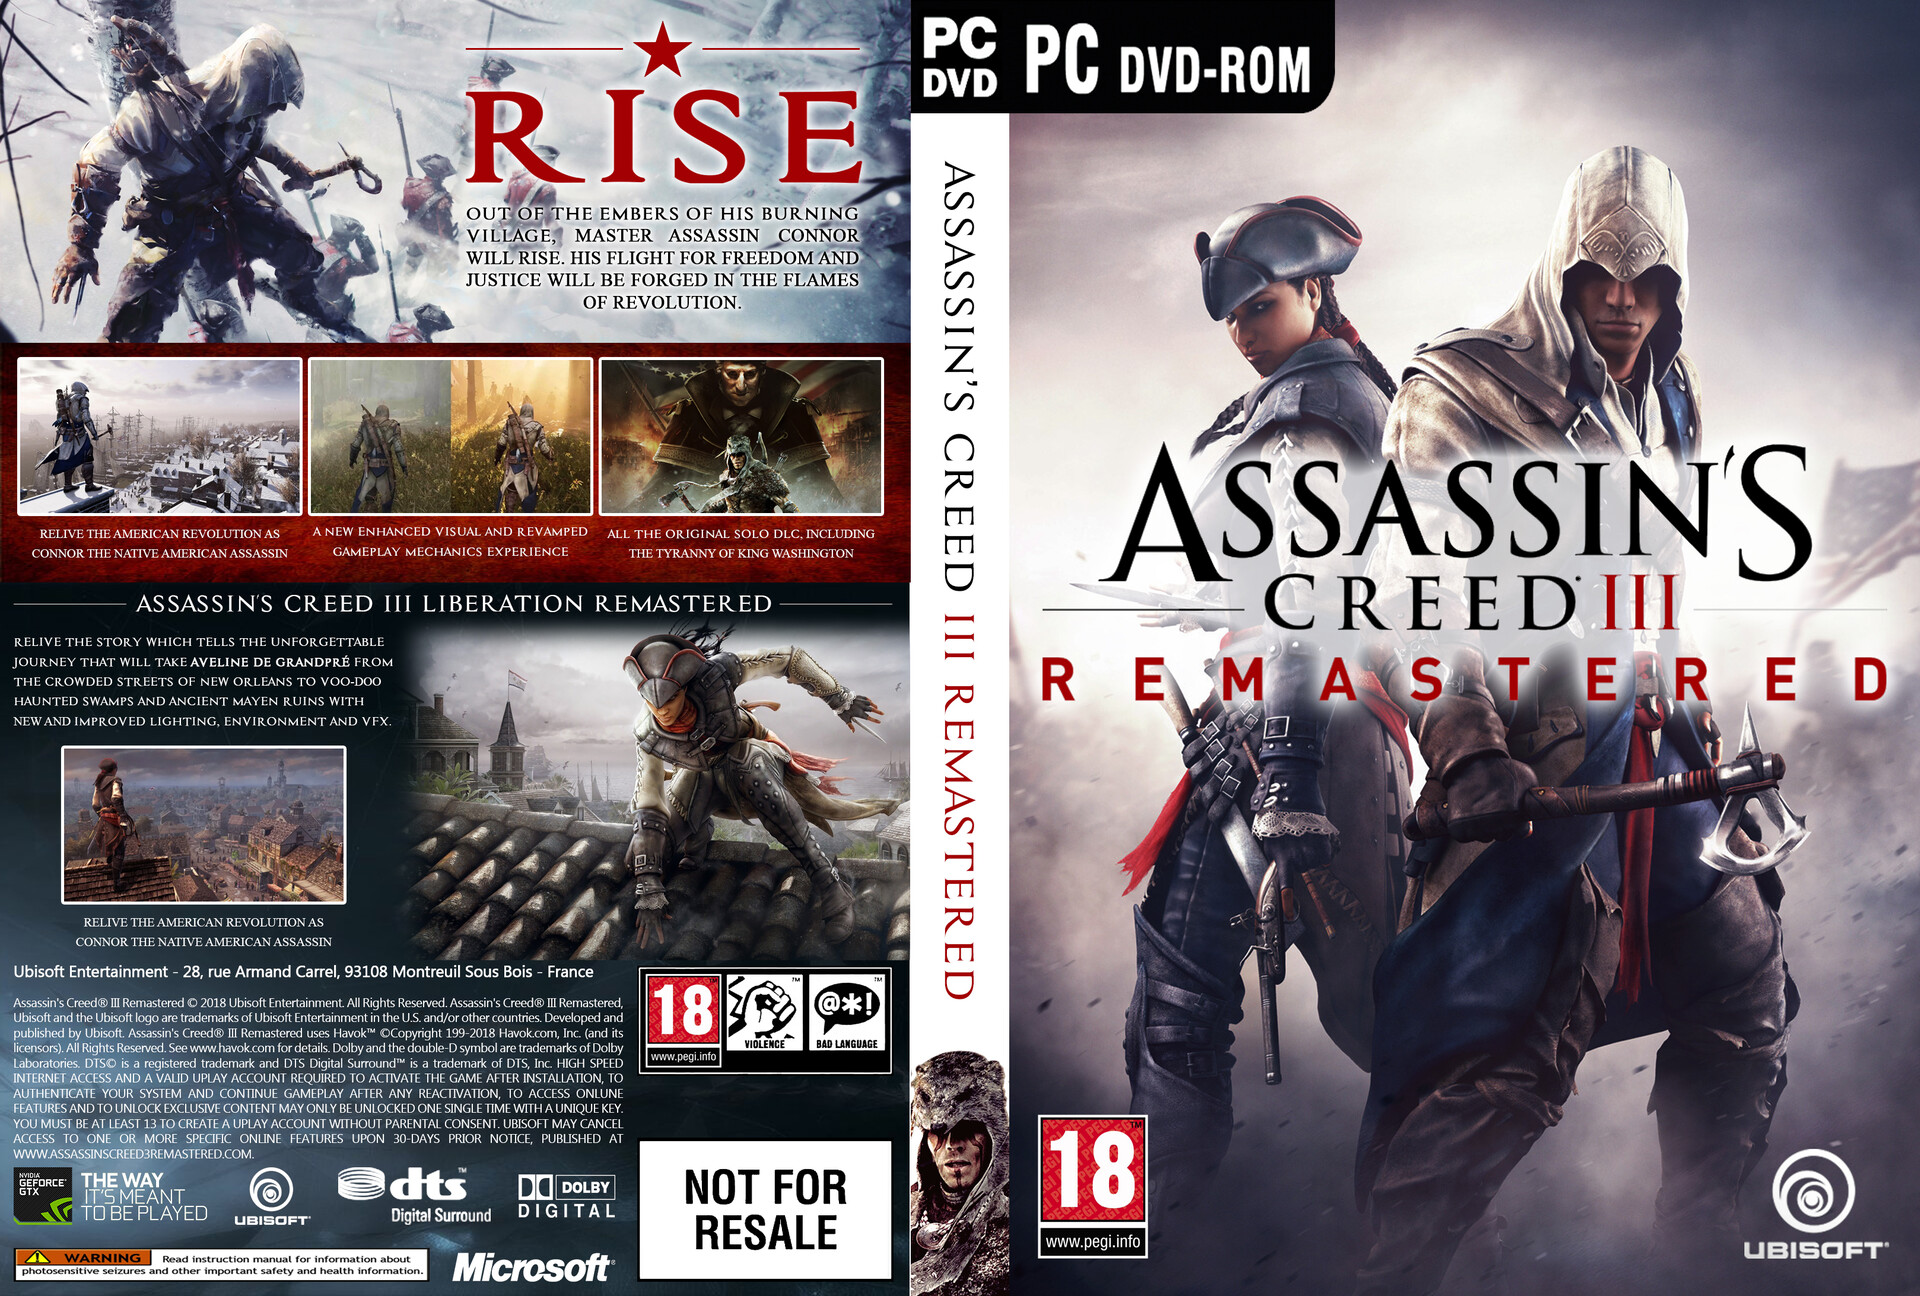 Ps3 remastered. Assassin's Creed 4 ps3 Cover DVD. Assassin's Creed III Remastered обложка ps4. Assassin's Creed диск PC. Ассасин Крид 3 Ремастеред диск.